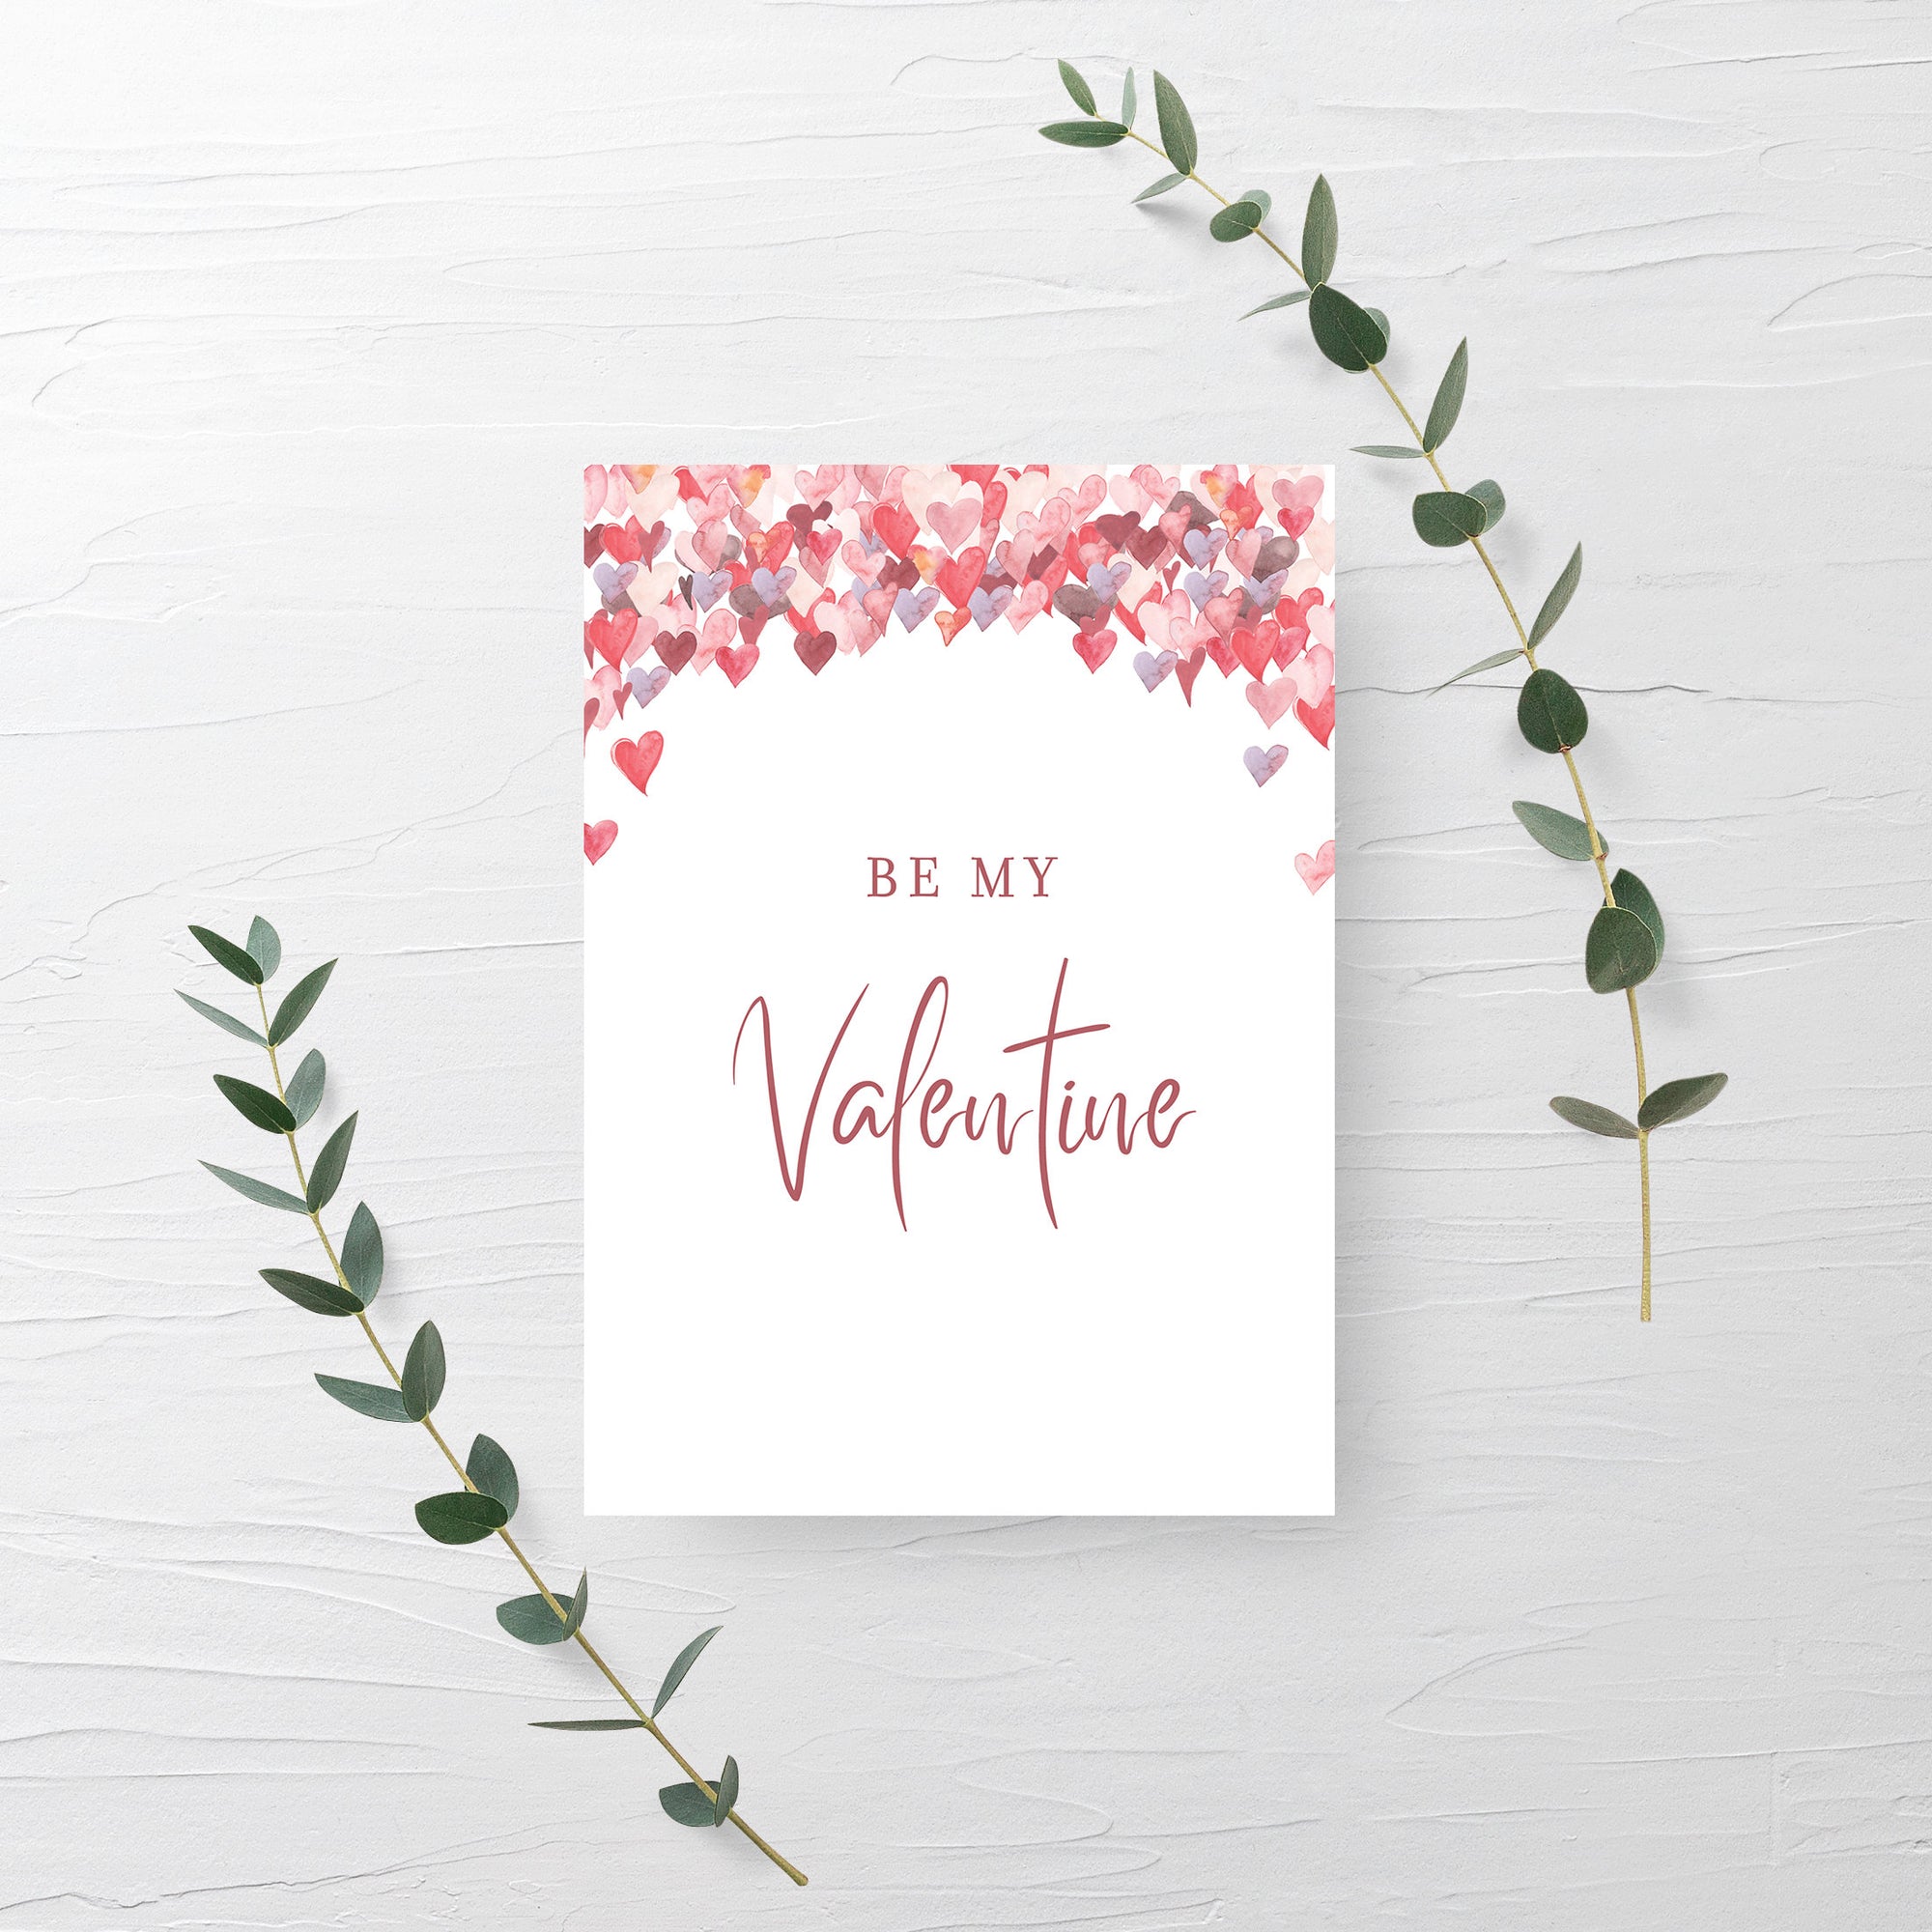 Be My Valentine Sign Printable, Valentines Day Decor, Valentines Day Party Decorations, Valentines Party Sign, INSTANT DOWNLOAD - VH100